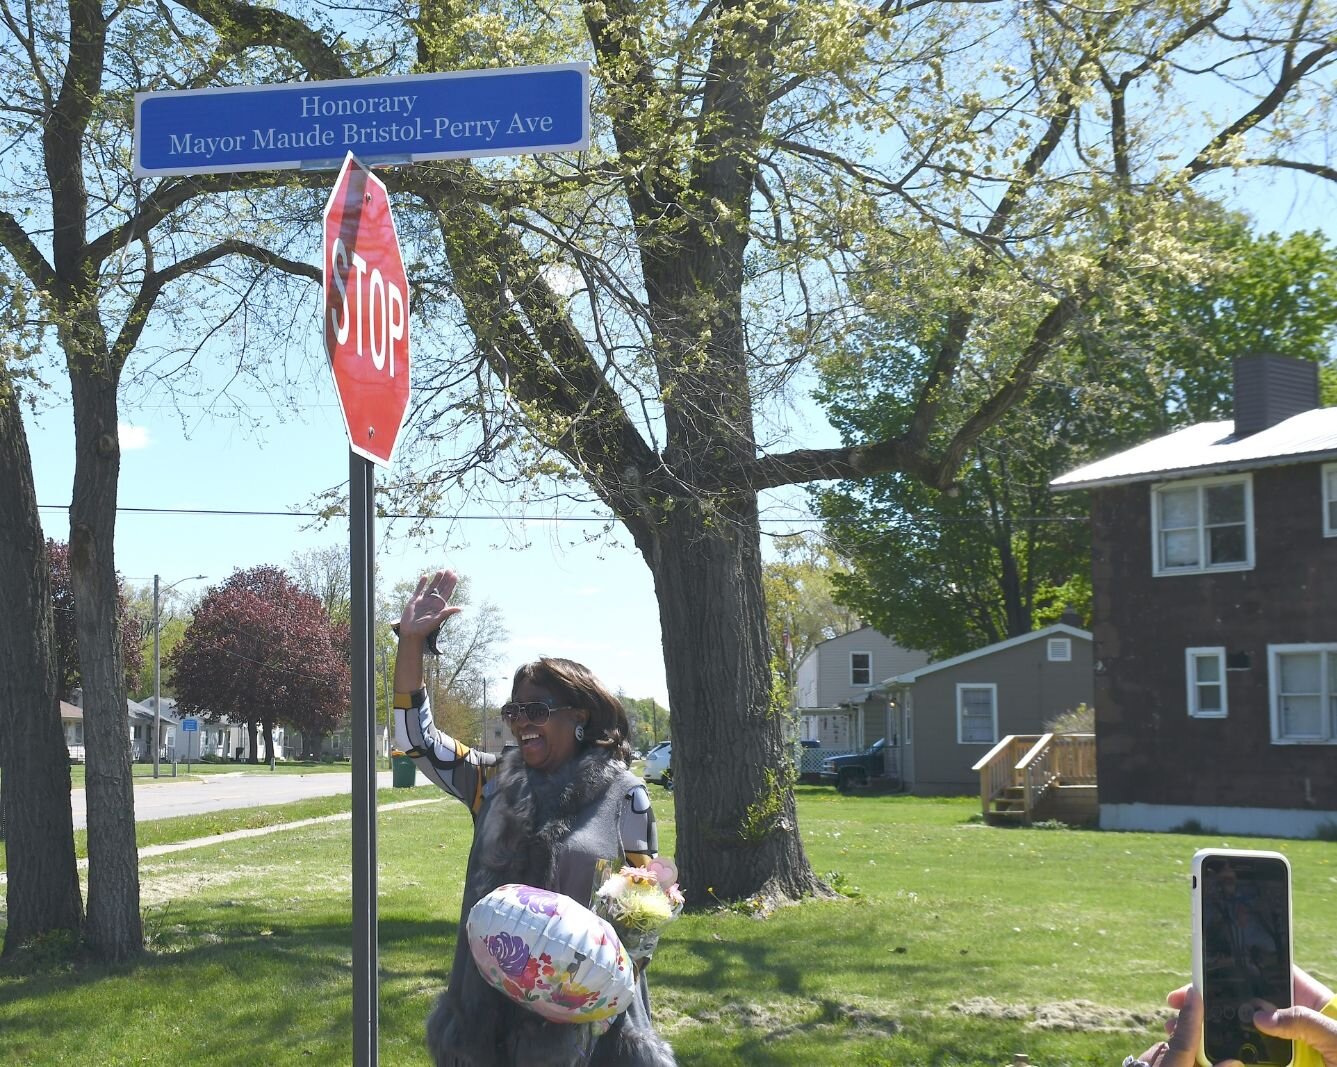 Maude Bristol-Perry stands by the street sign of Honorary Mayor Maude Bristol-Perry Avenue and waves to wellwishers